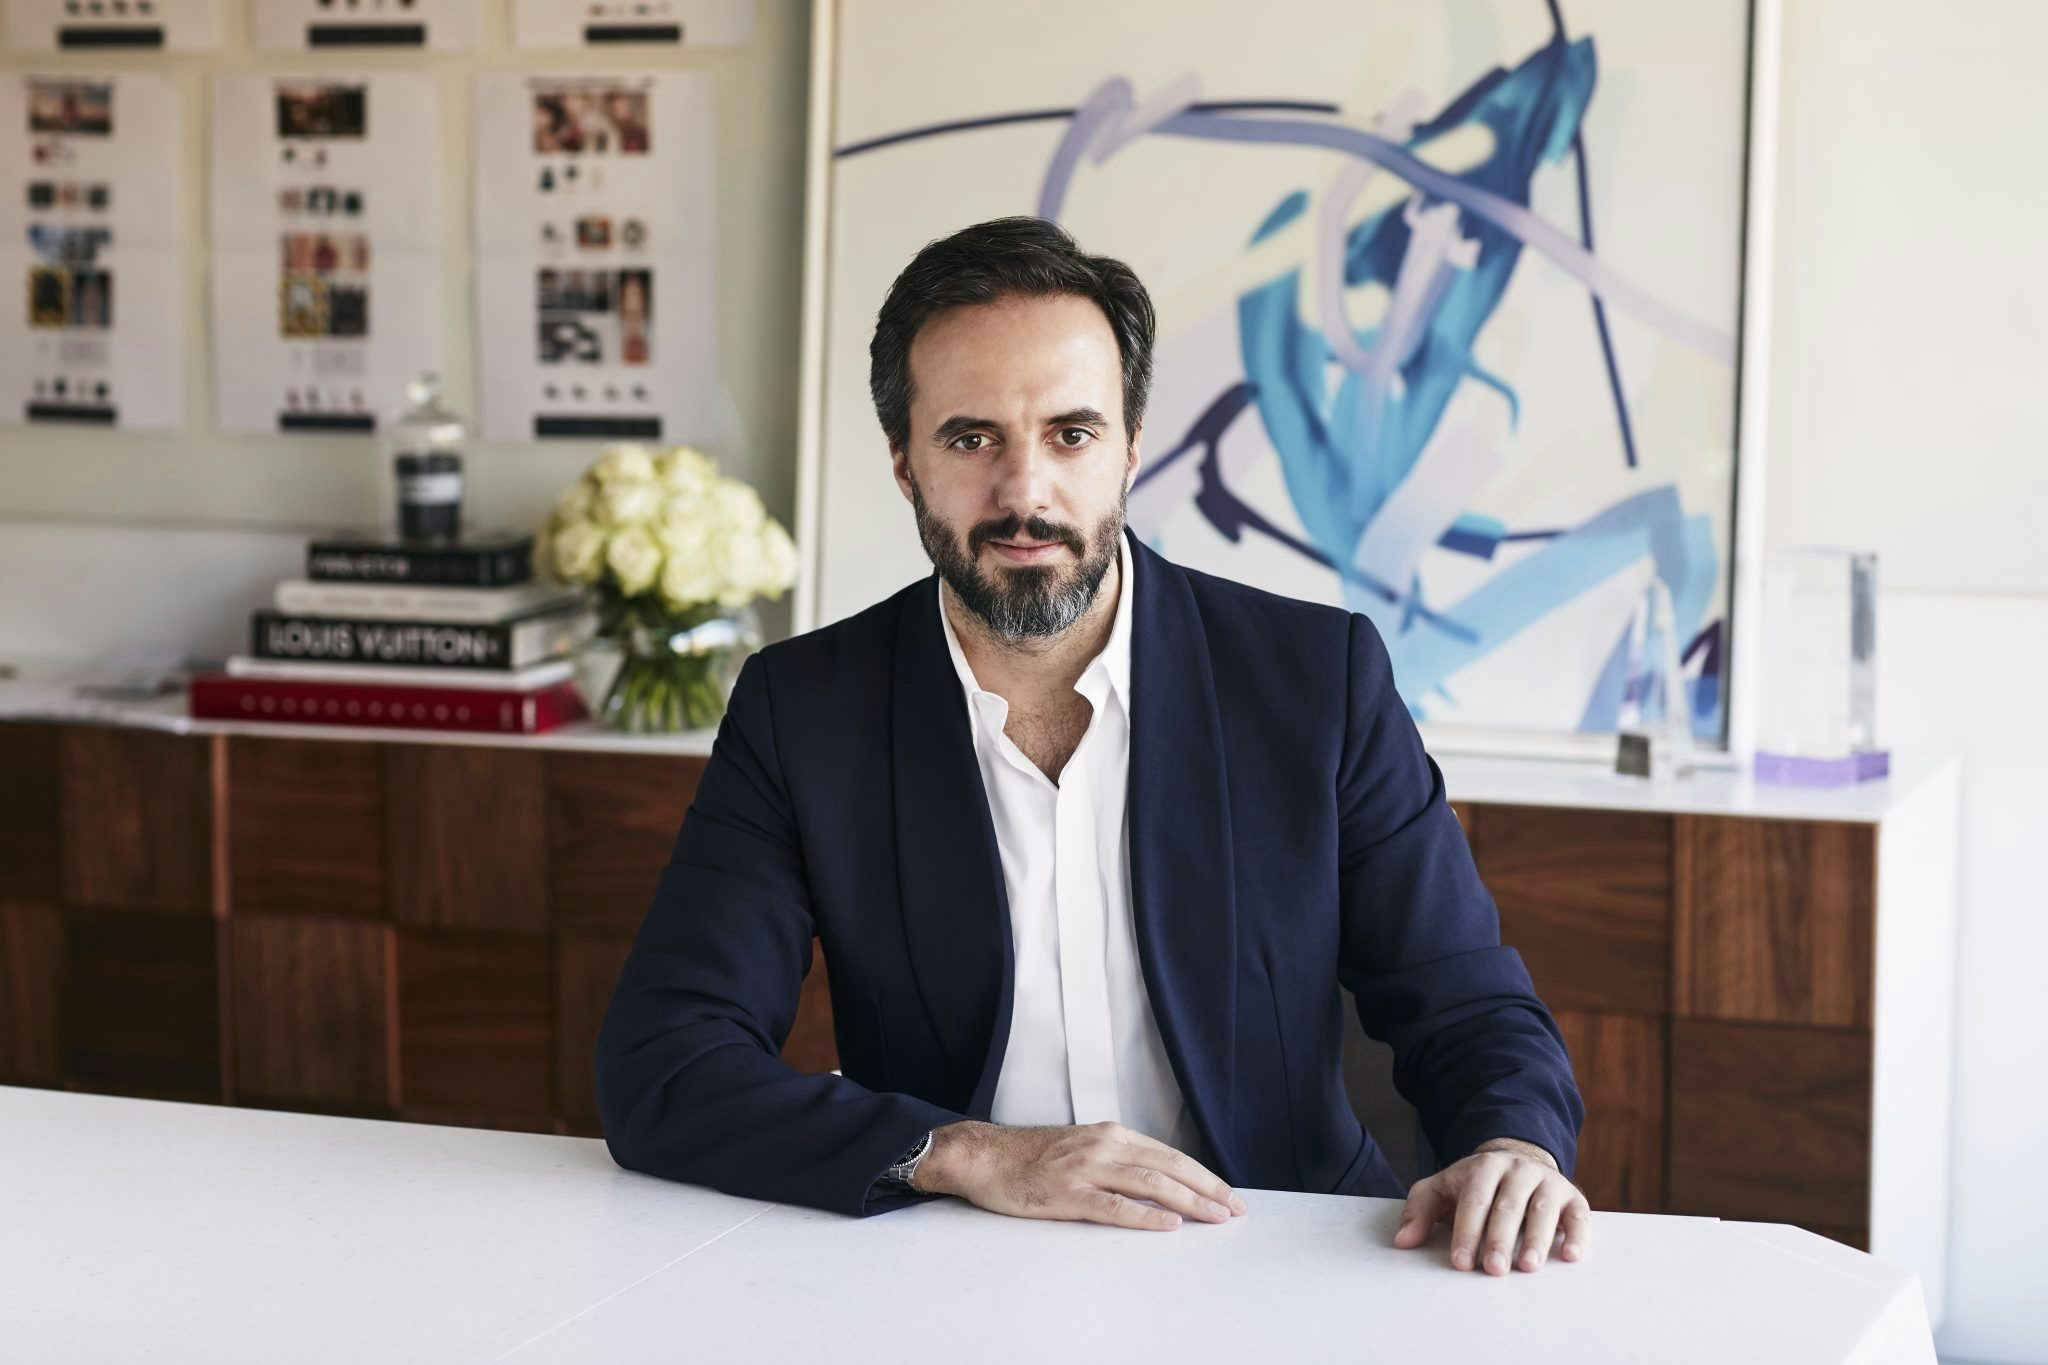 Farfetch CEO José Neves on the Chinese Partners Catapulting Them Ahead